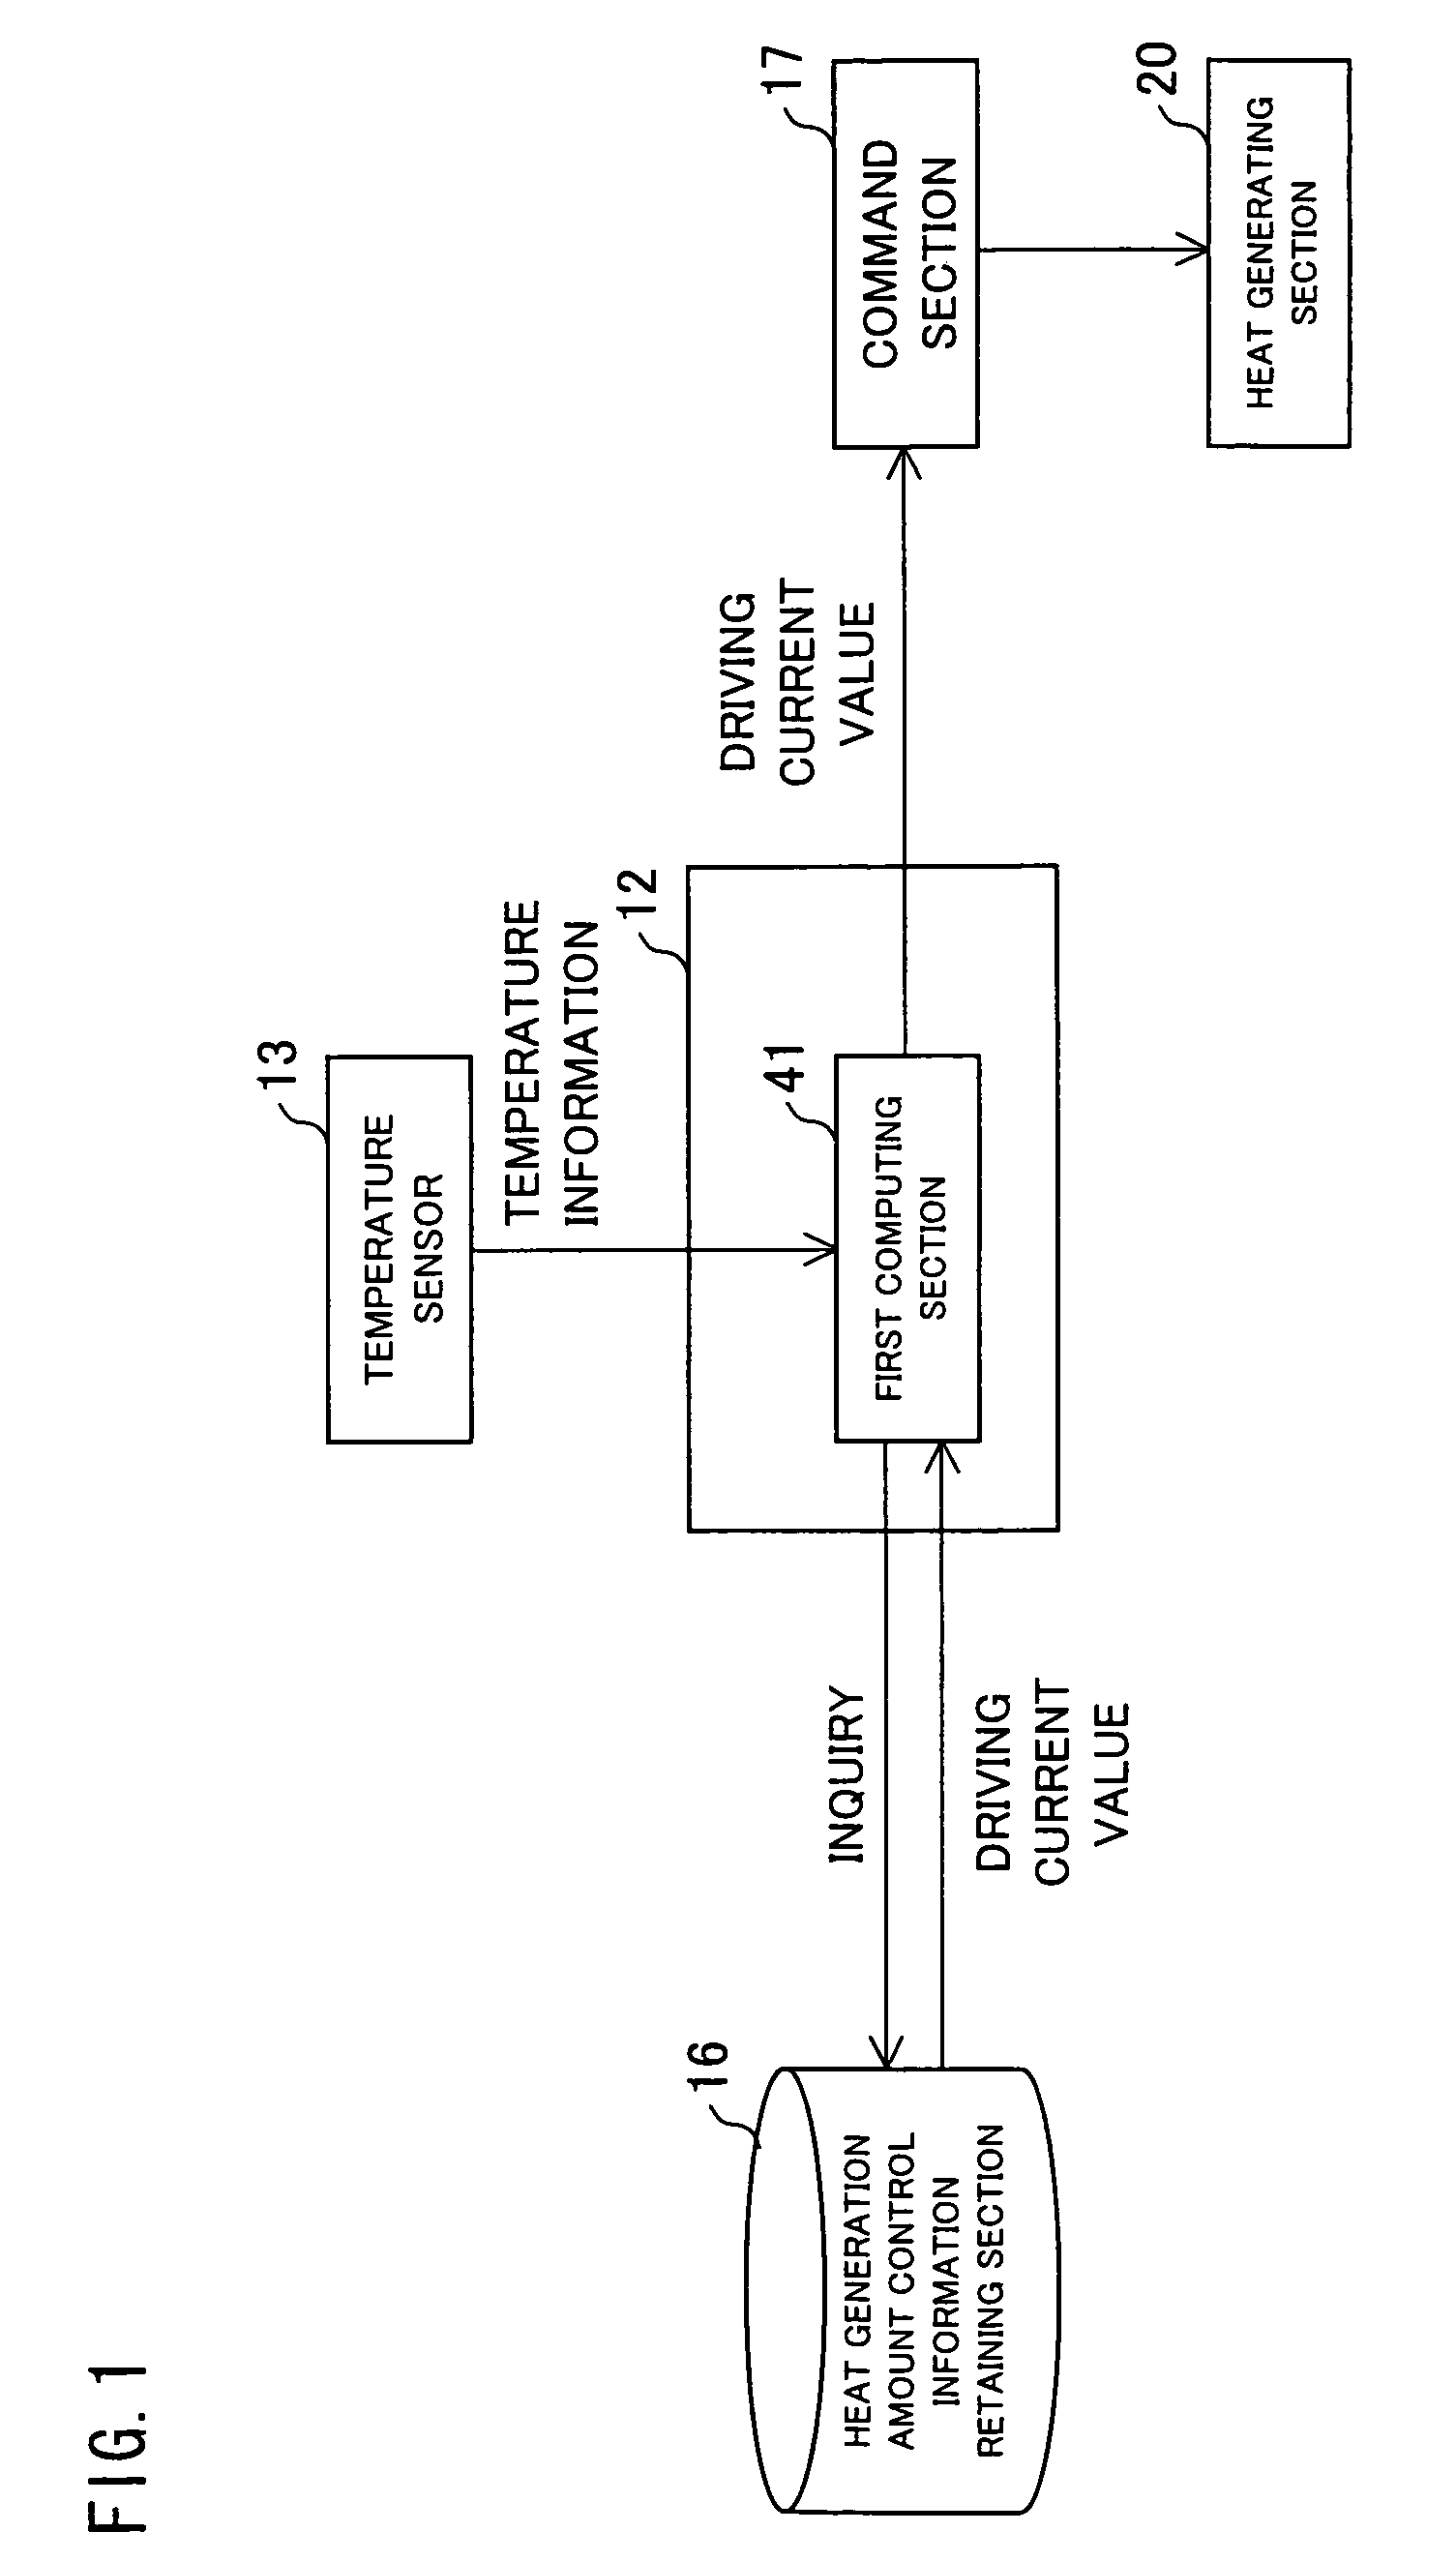 Heat generation control device for heat-assisted magnetic recording and reproducing apparatus